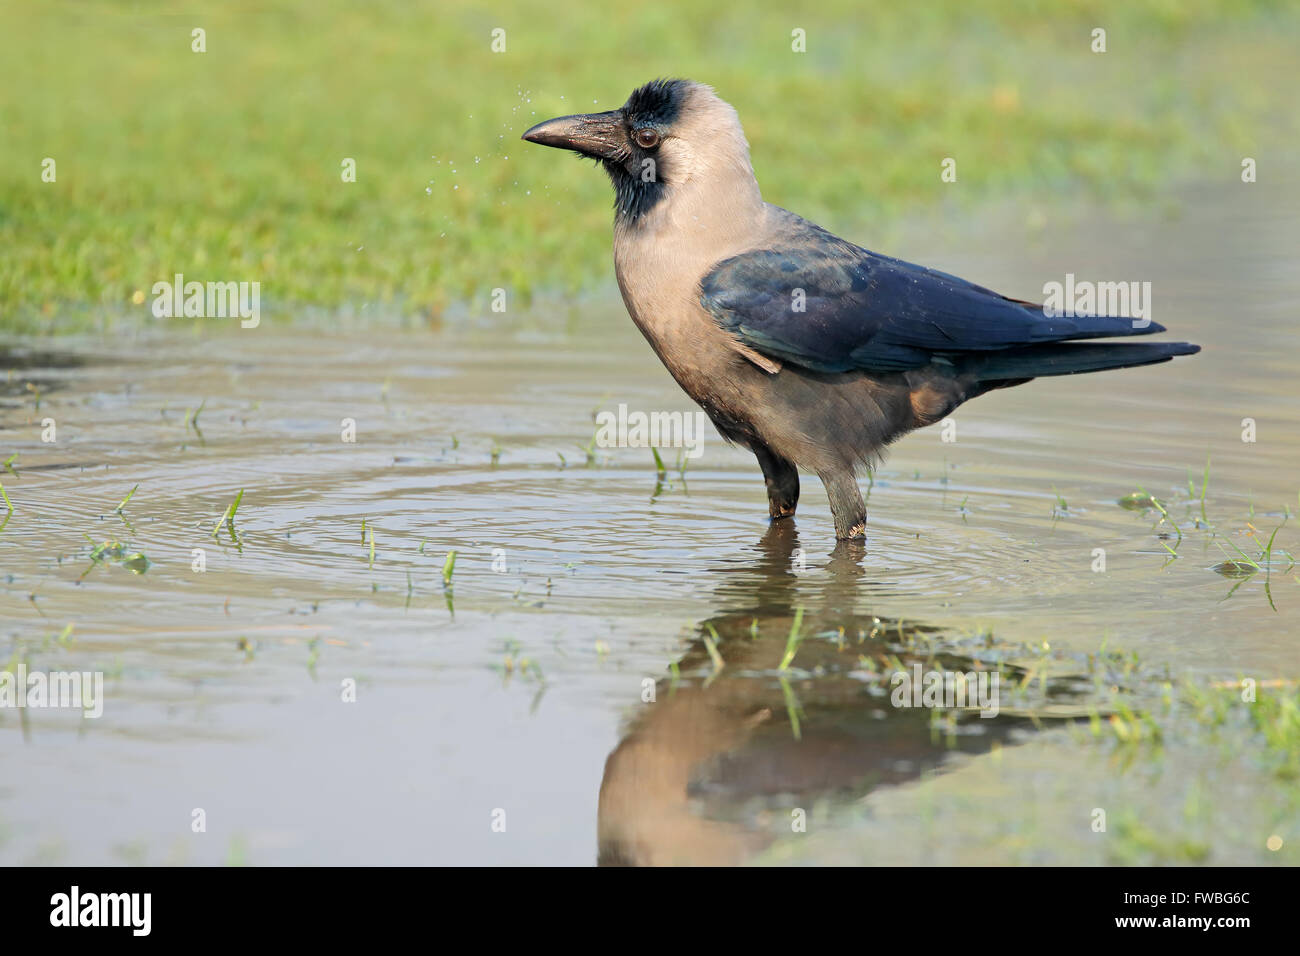 An Indian house crow (Corvus splendens) standing in water, India Stock Photo